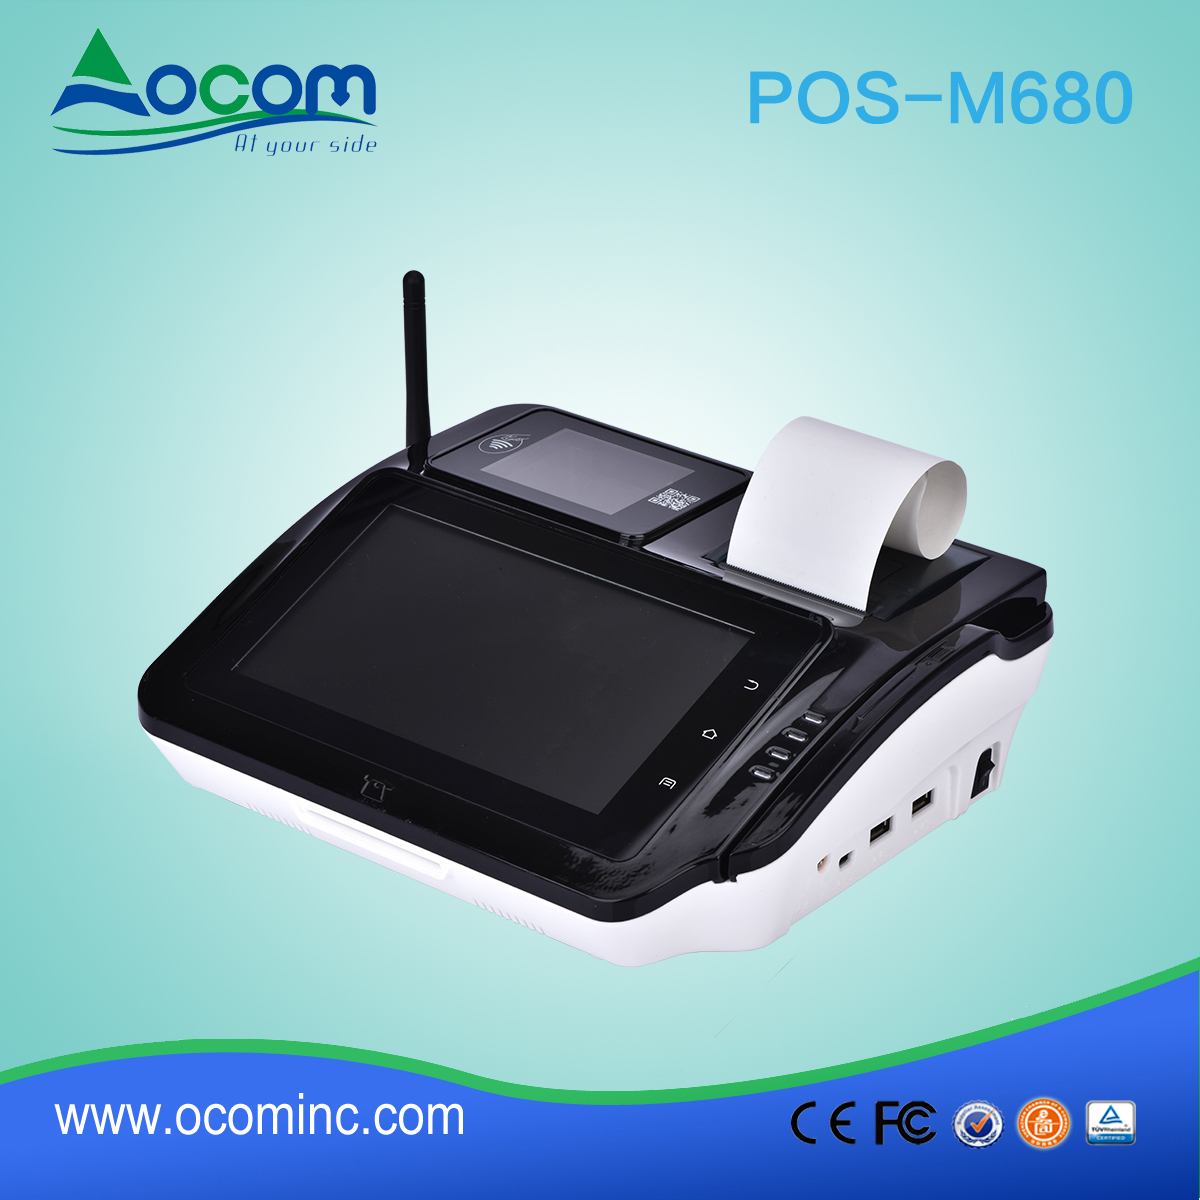 POS-M680 Tablet POS Terminal Android All-in-one pc